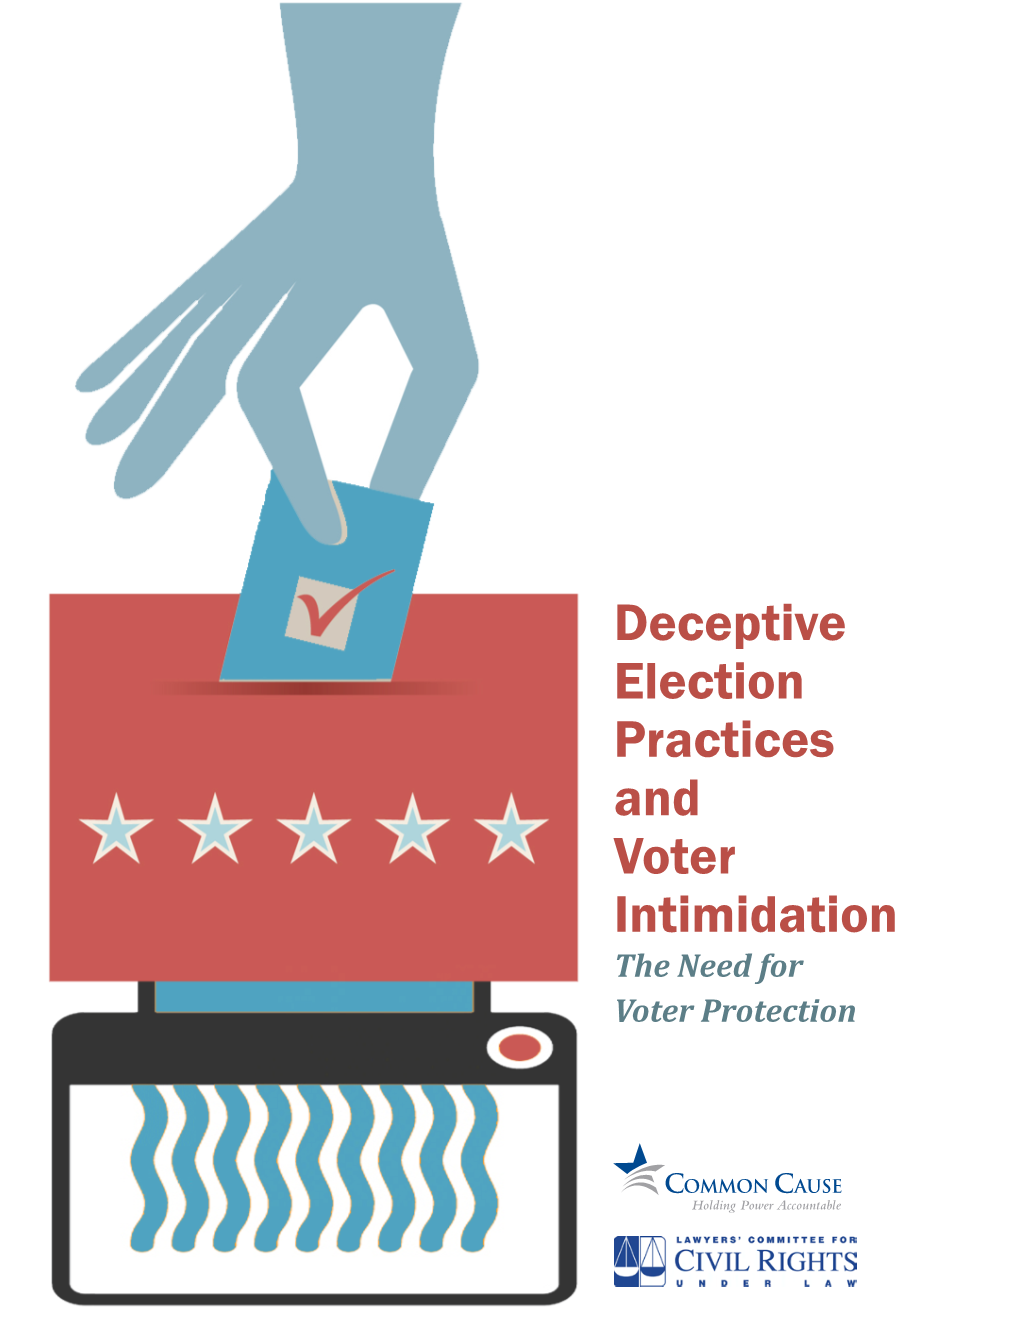 Deceptive Election Practices and Voter Intimidation the Need for Voter Protection Deceptive Election Practices and Voter Intimidation the Need for Voter Protection